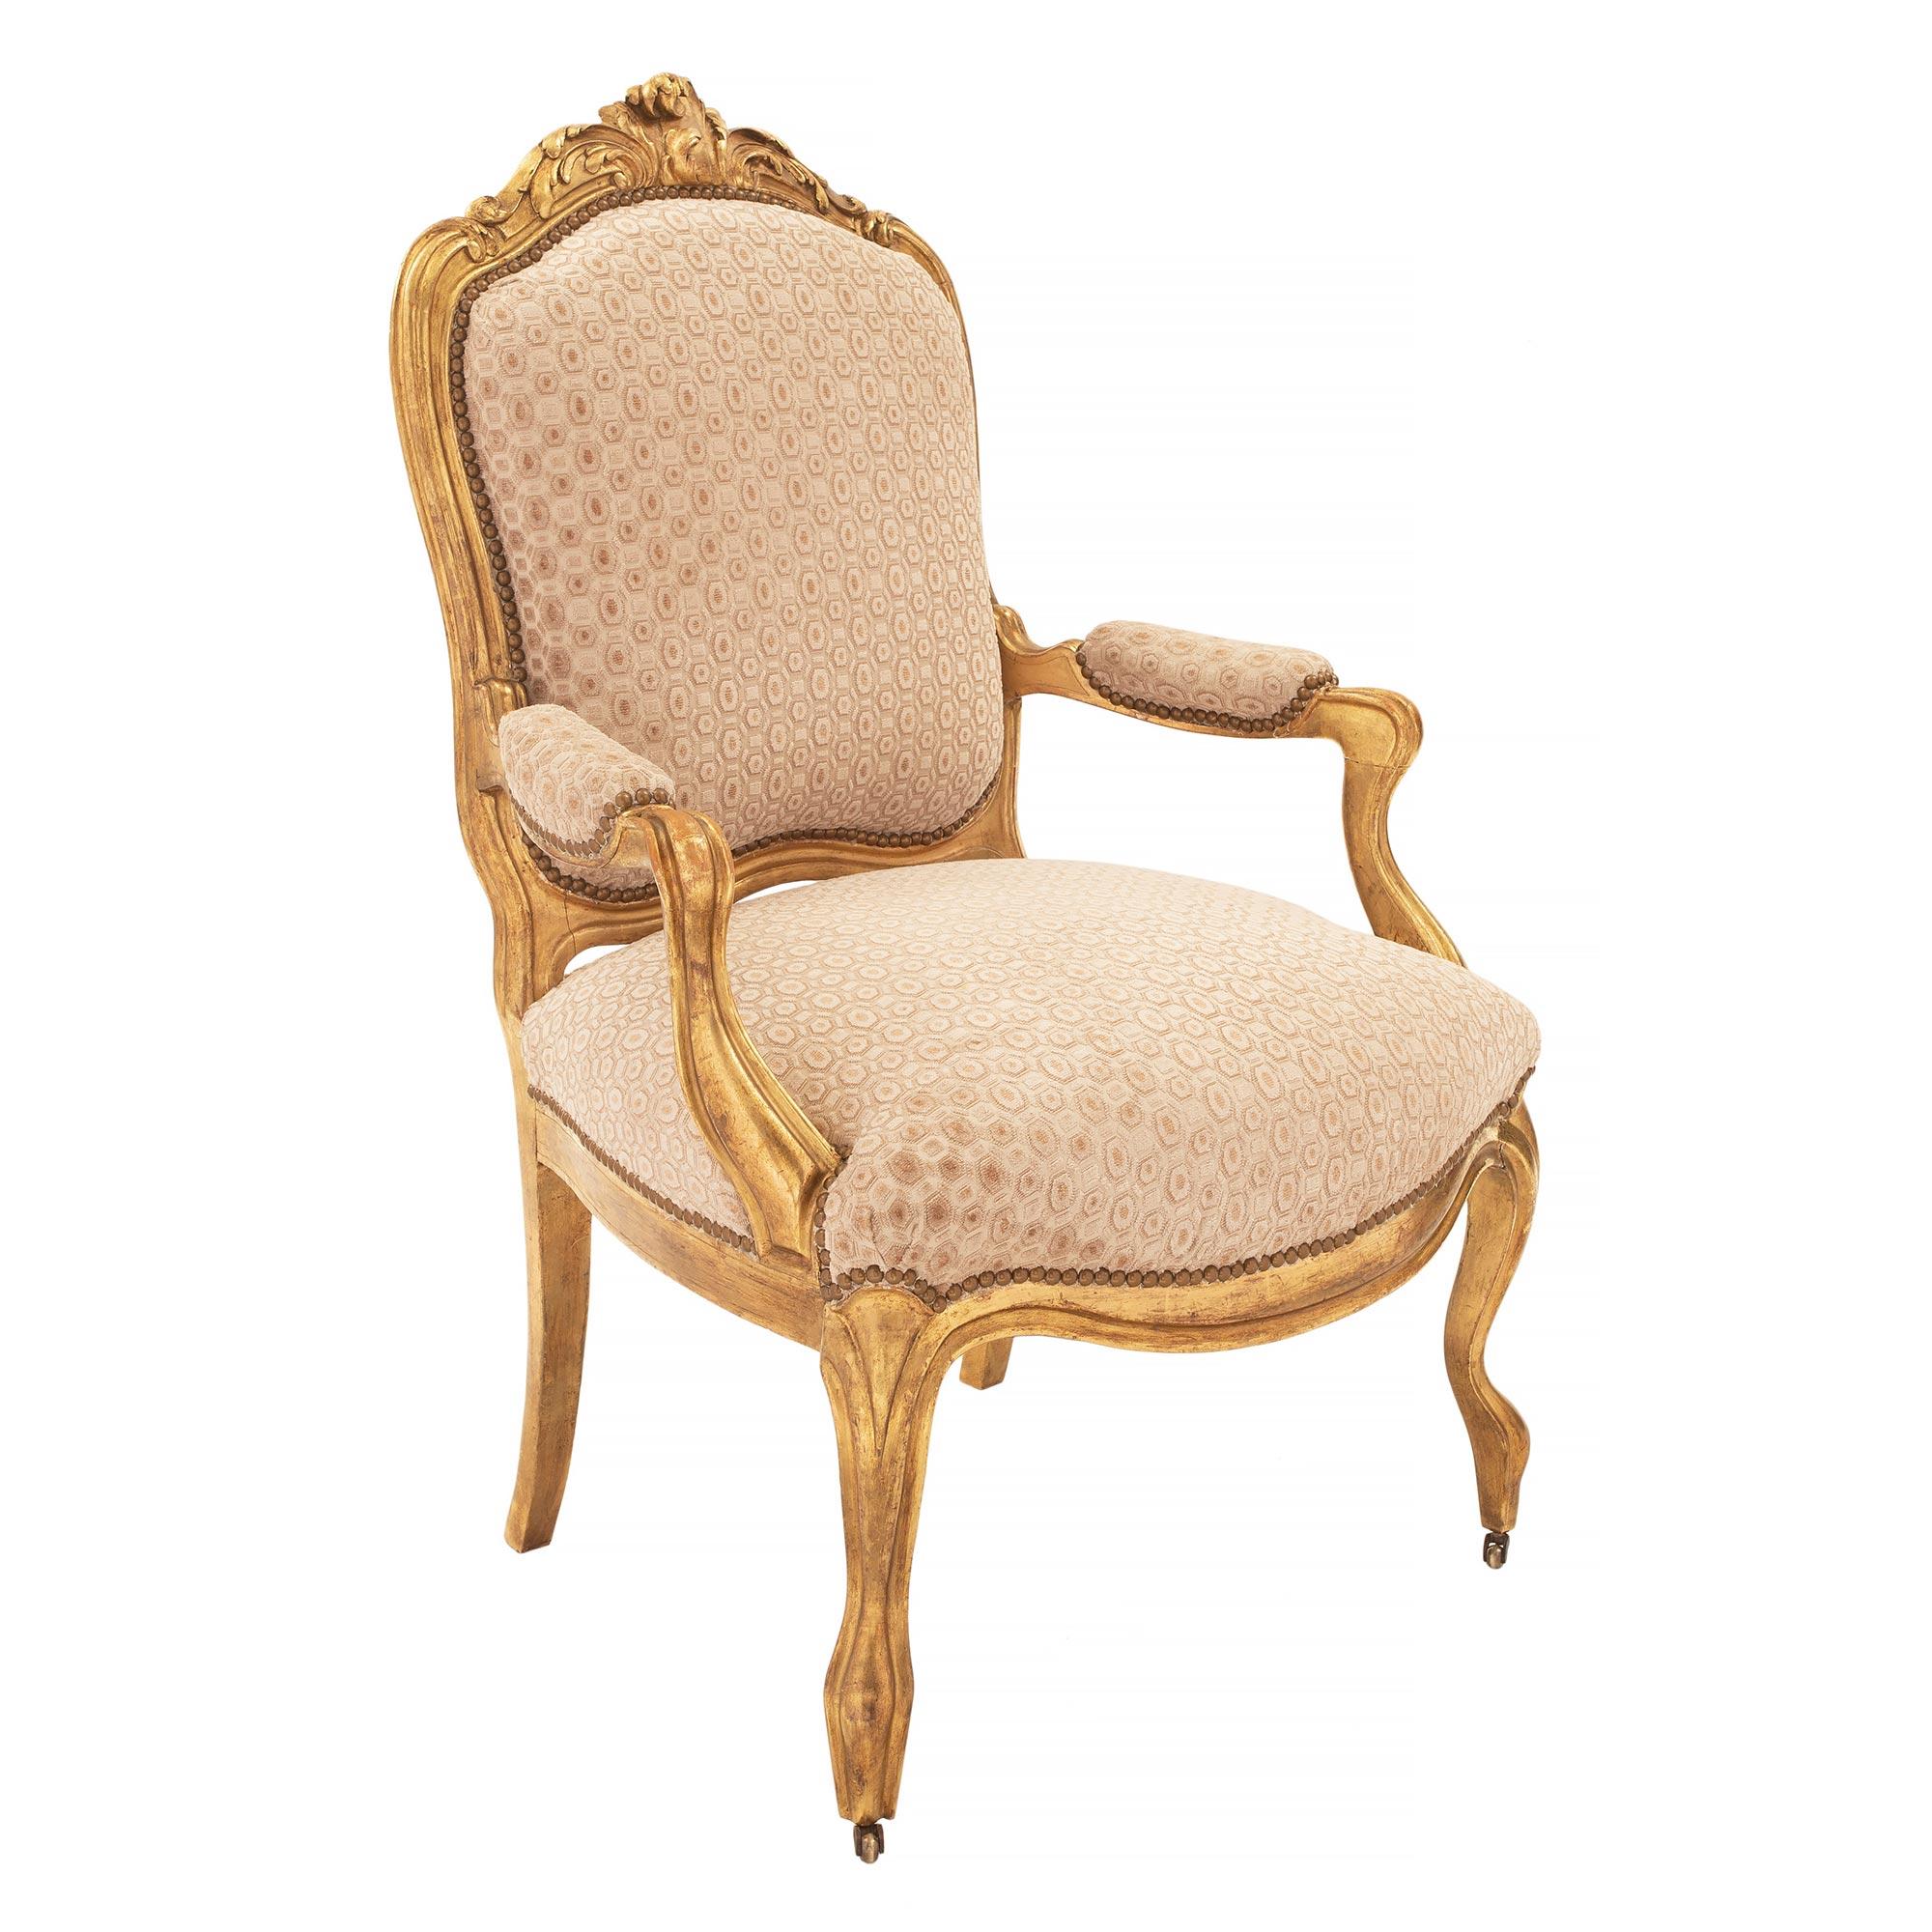 A most elegant pair of French 19th century Louis XV st. giltwood armchairs. Each chair is raised by fine cabriole legs with a decorative mottled band which extends along the arbalest shaped frieze and sides. Each cushioned arm rest displays a